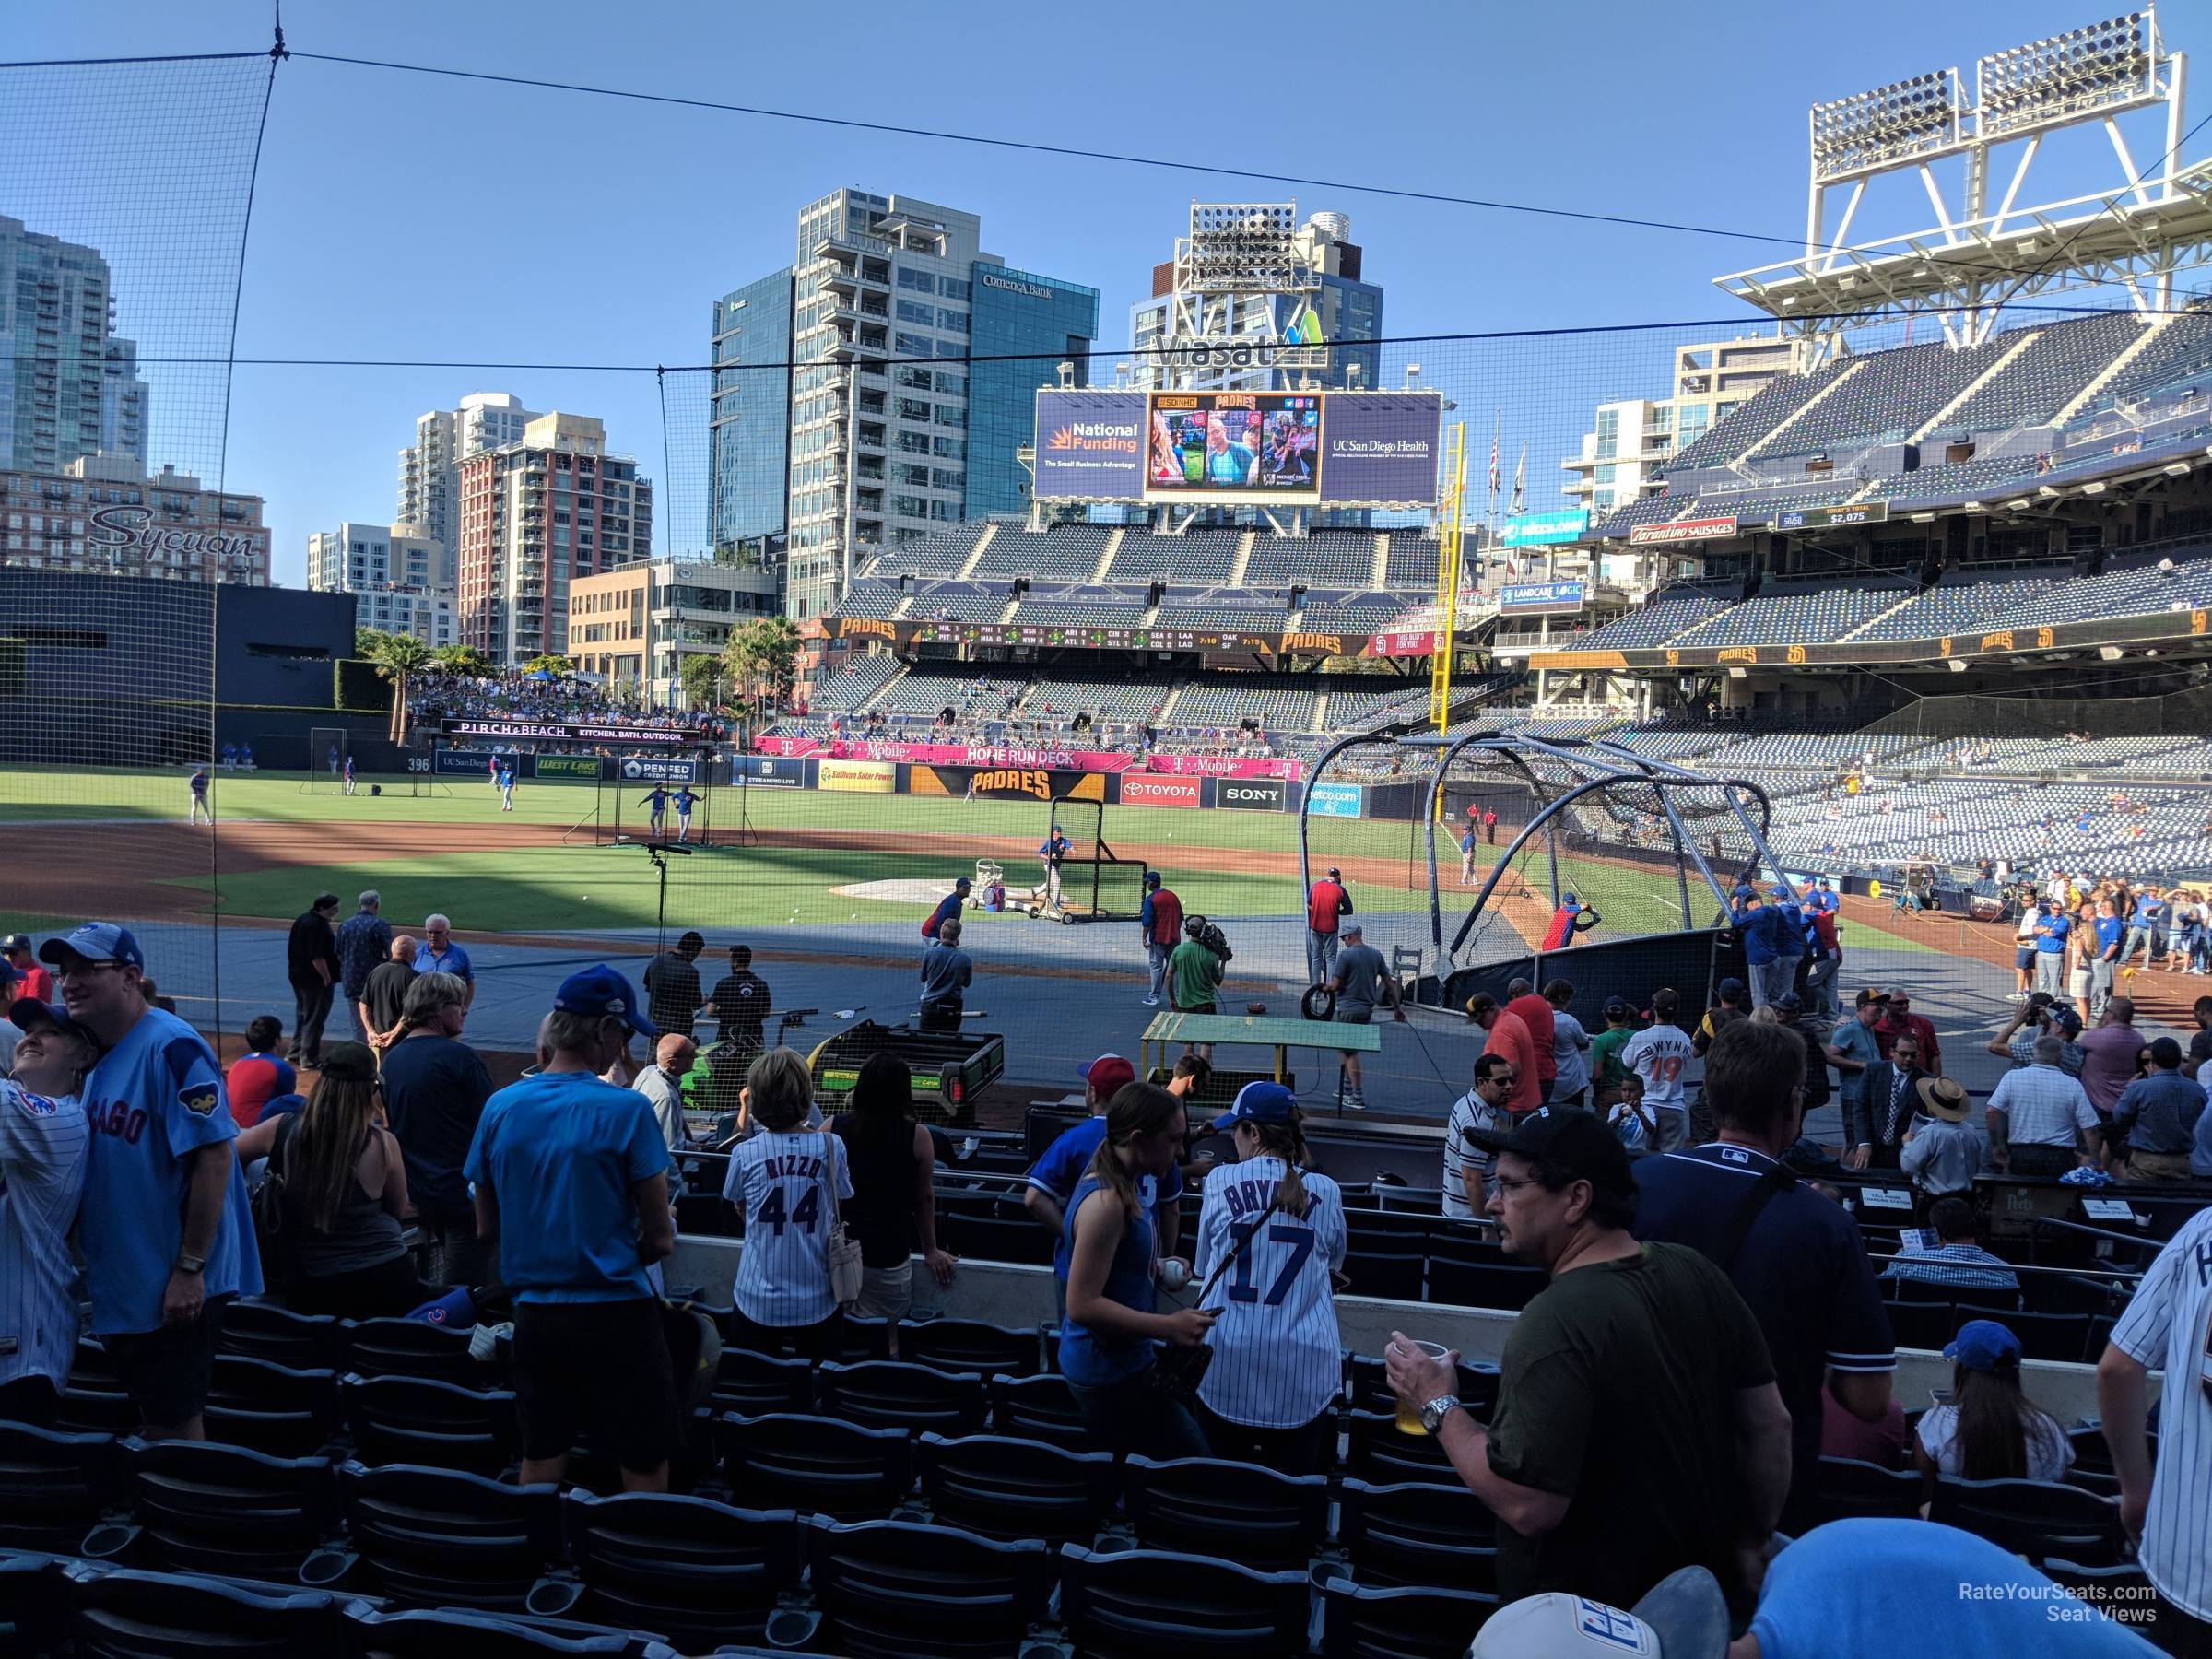 section 106, row 16 seat view  for baseball - petco park